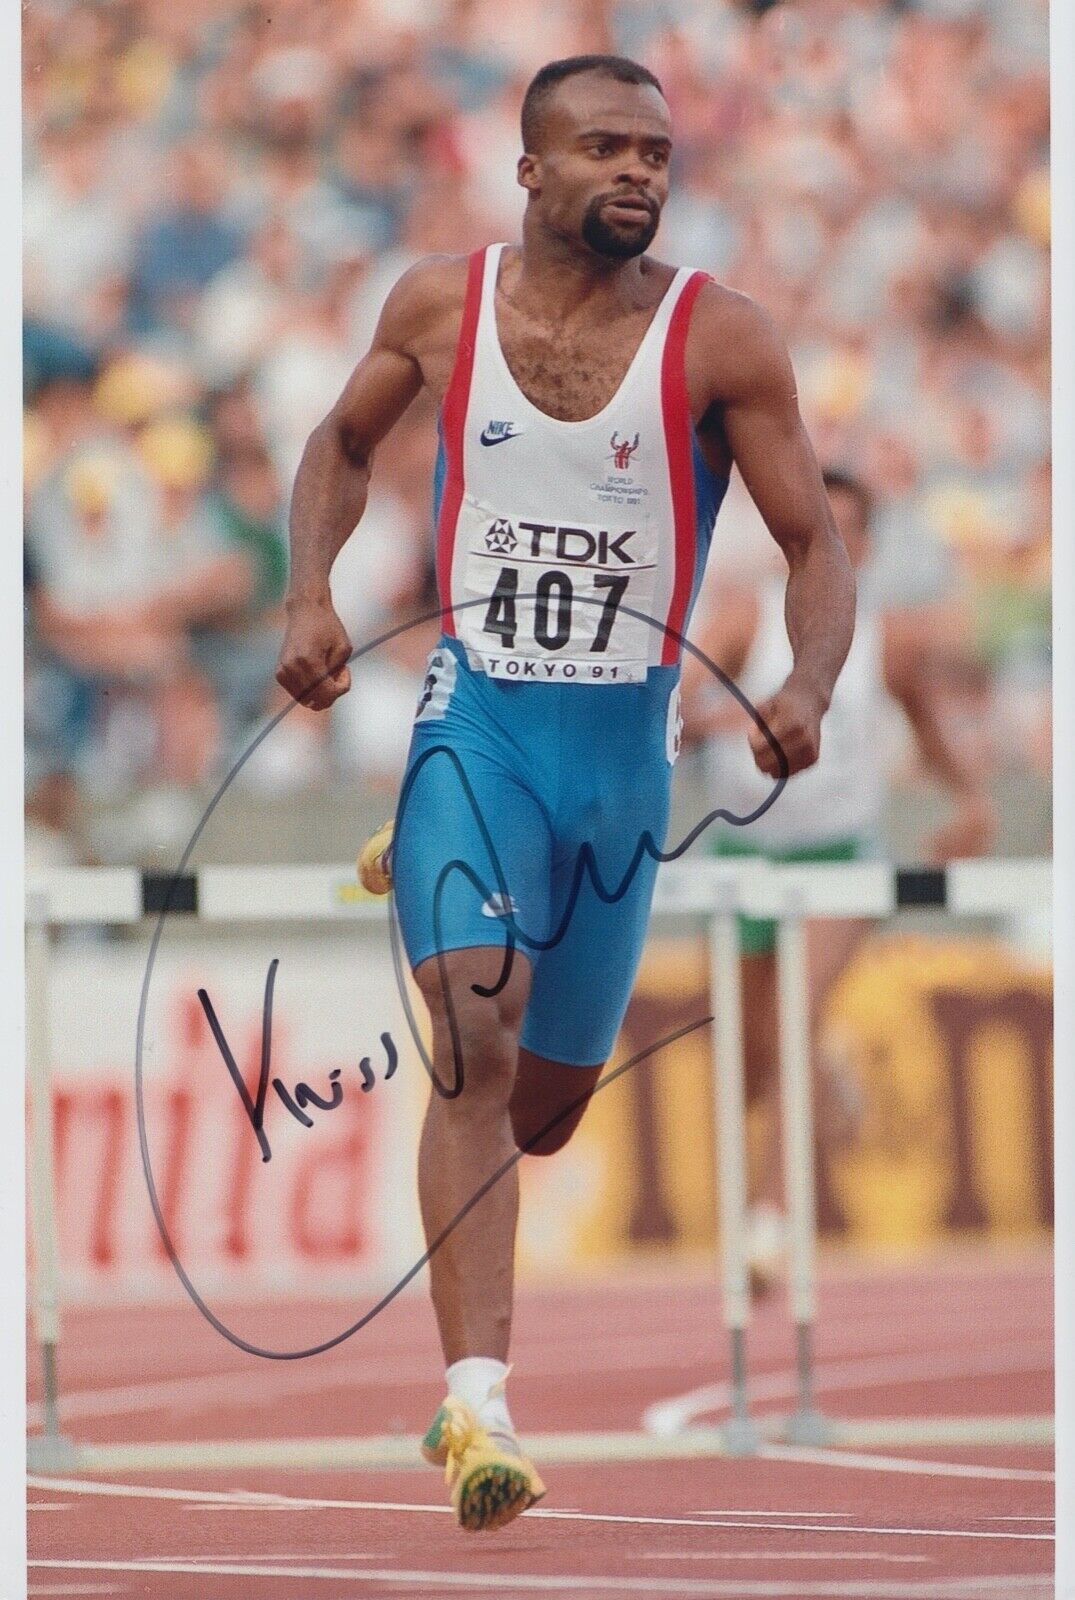 Kriss Akabusi Hand Signed 12x8 Photo Poster painting - Olympics Autograph.